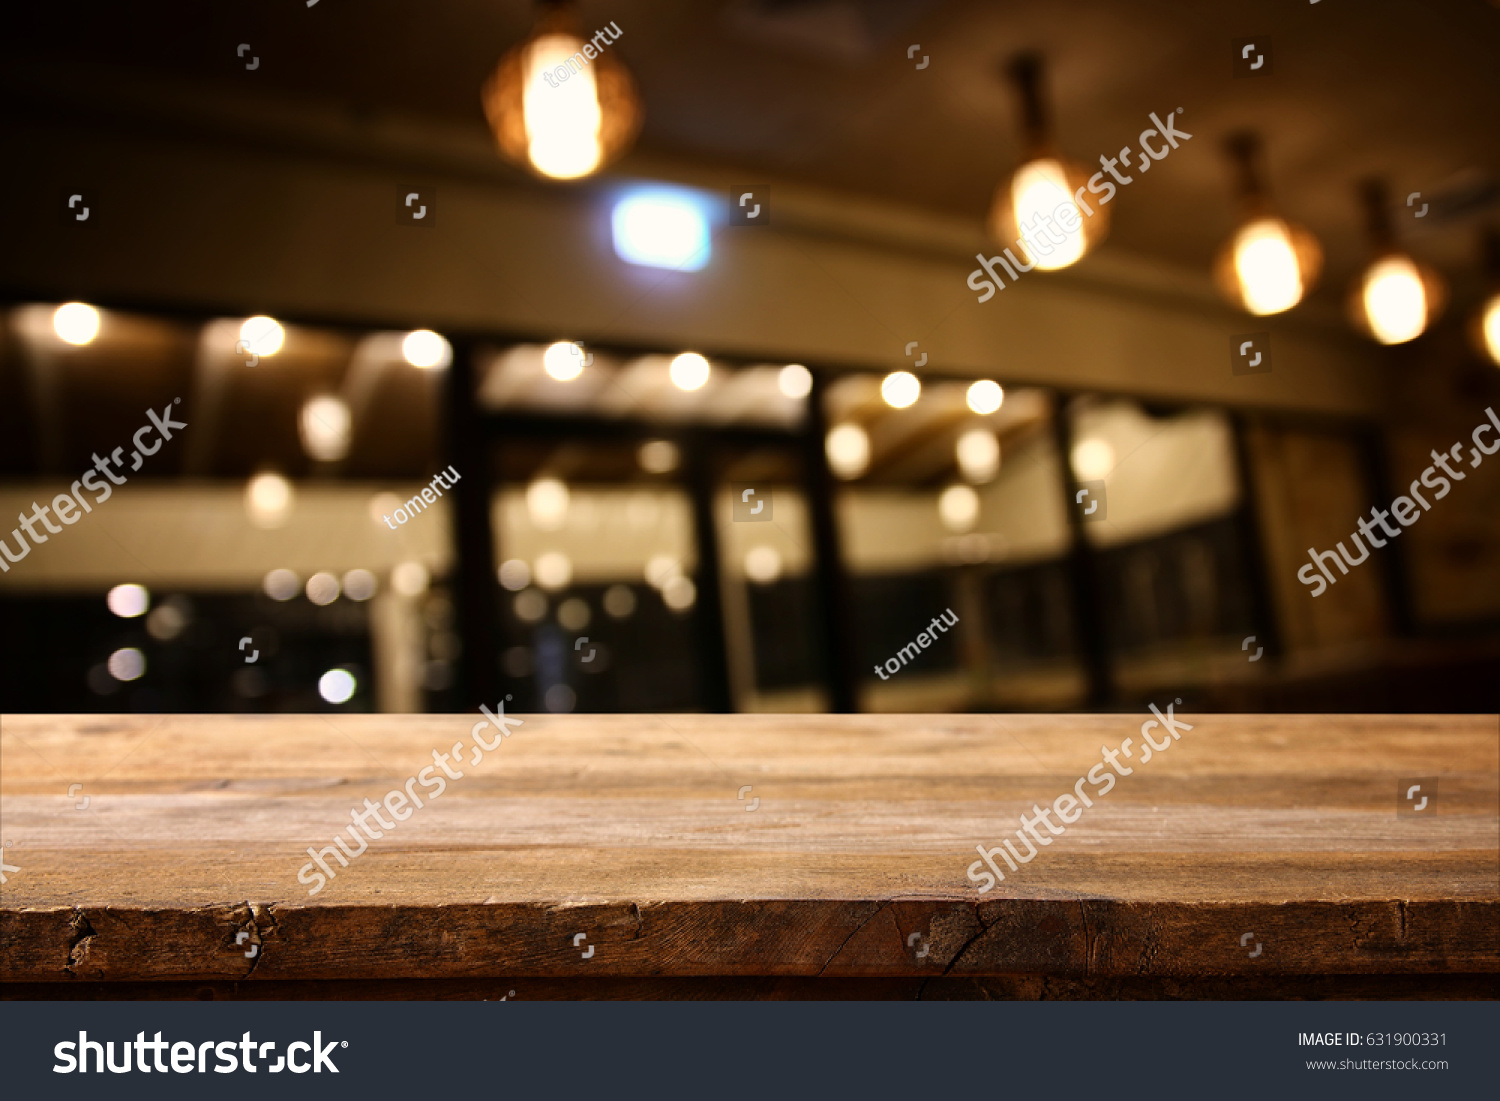 Image of wooden table in front of abstract blurred restaurant lights background. #631900331